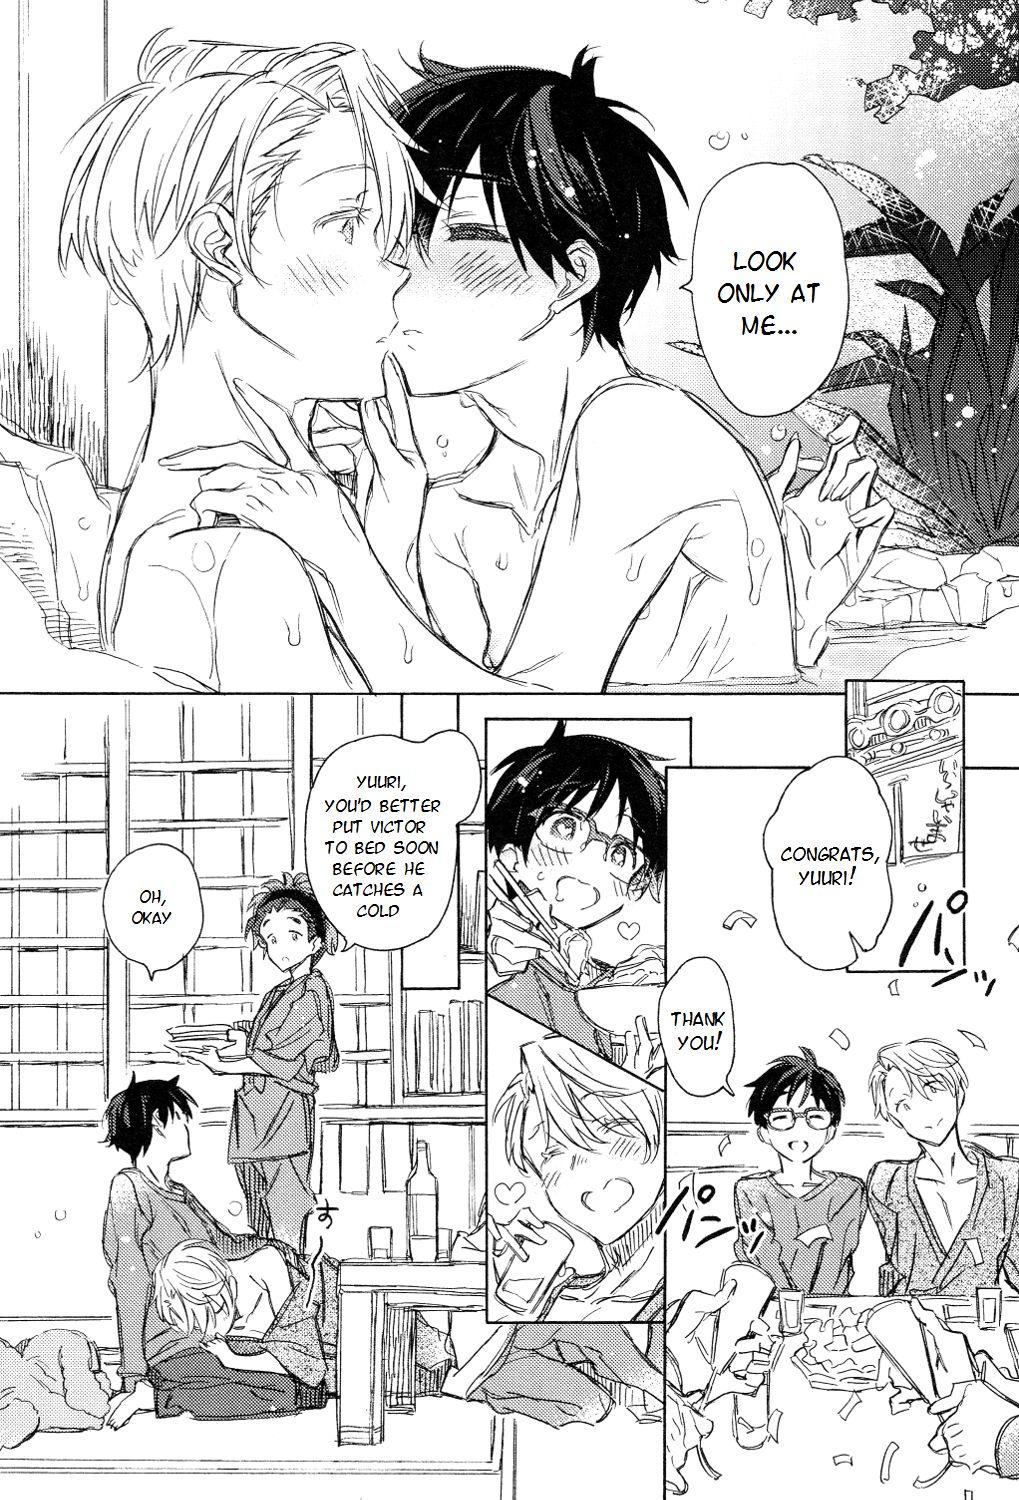 Pervs BRAND NEW DAY,BRAND NEW LIFE - Yuri on ice Teenage - Page 6